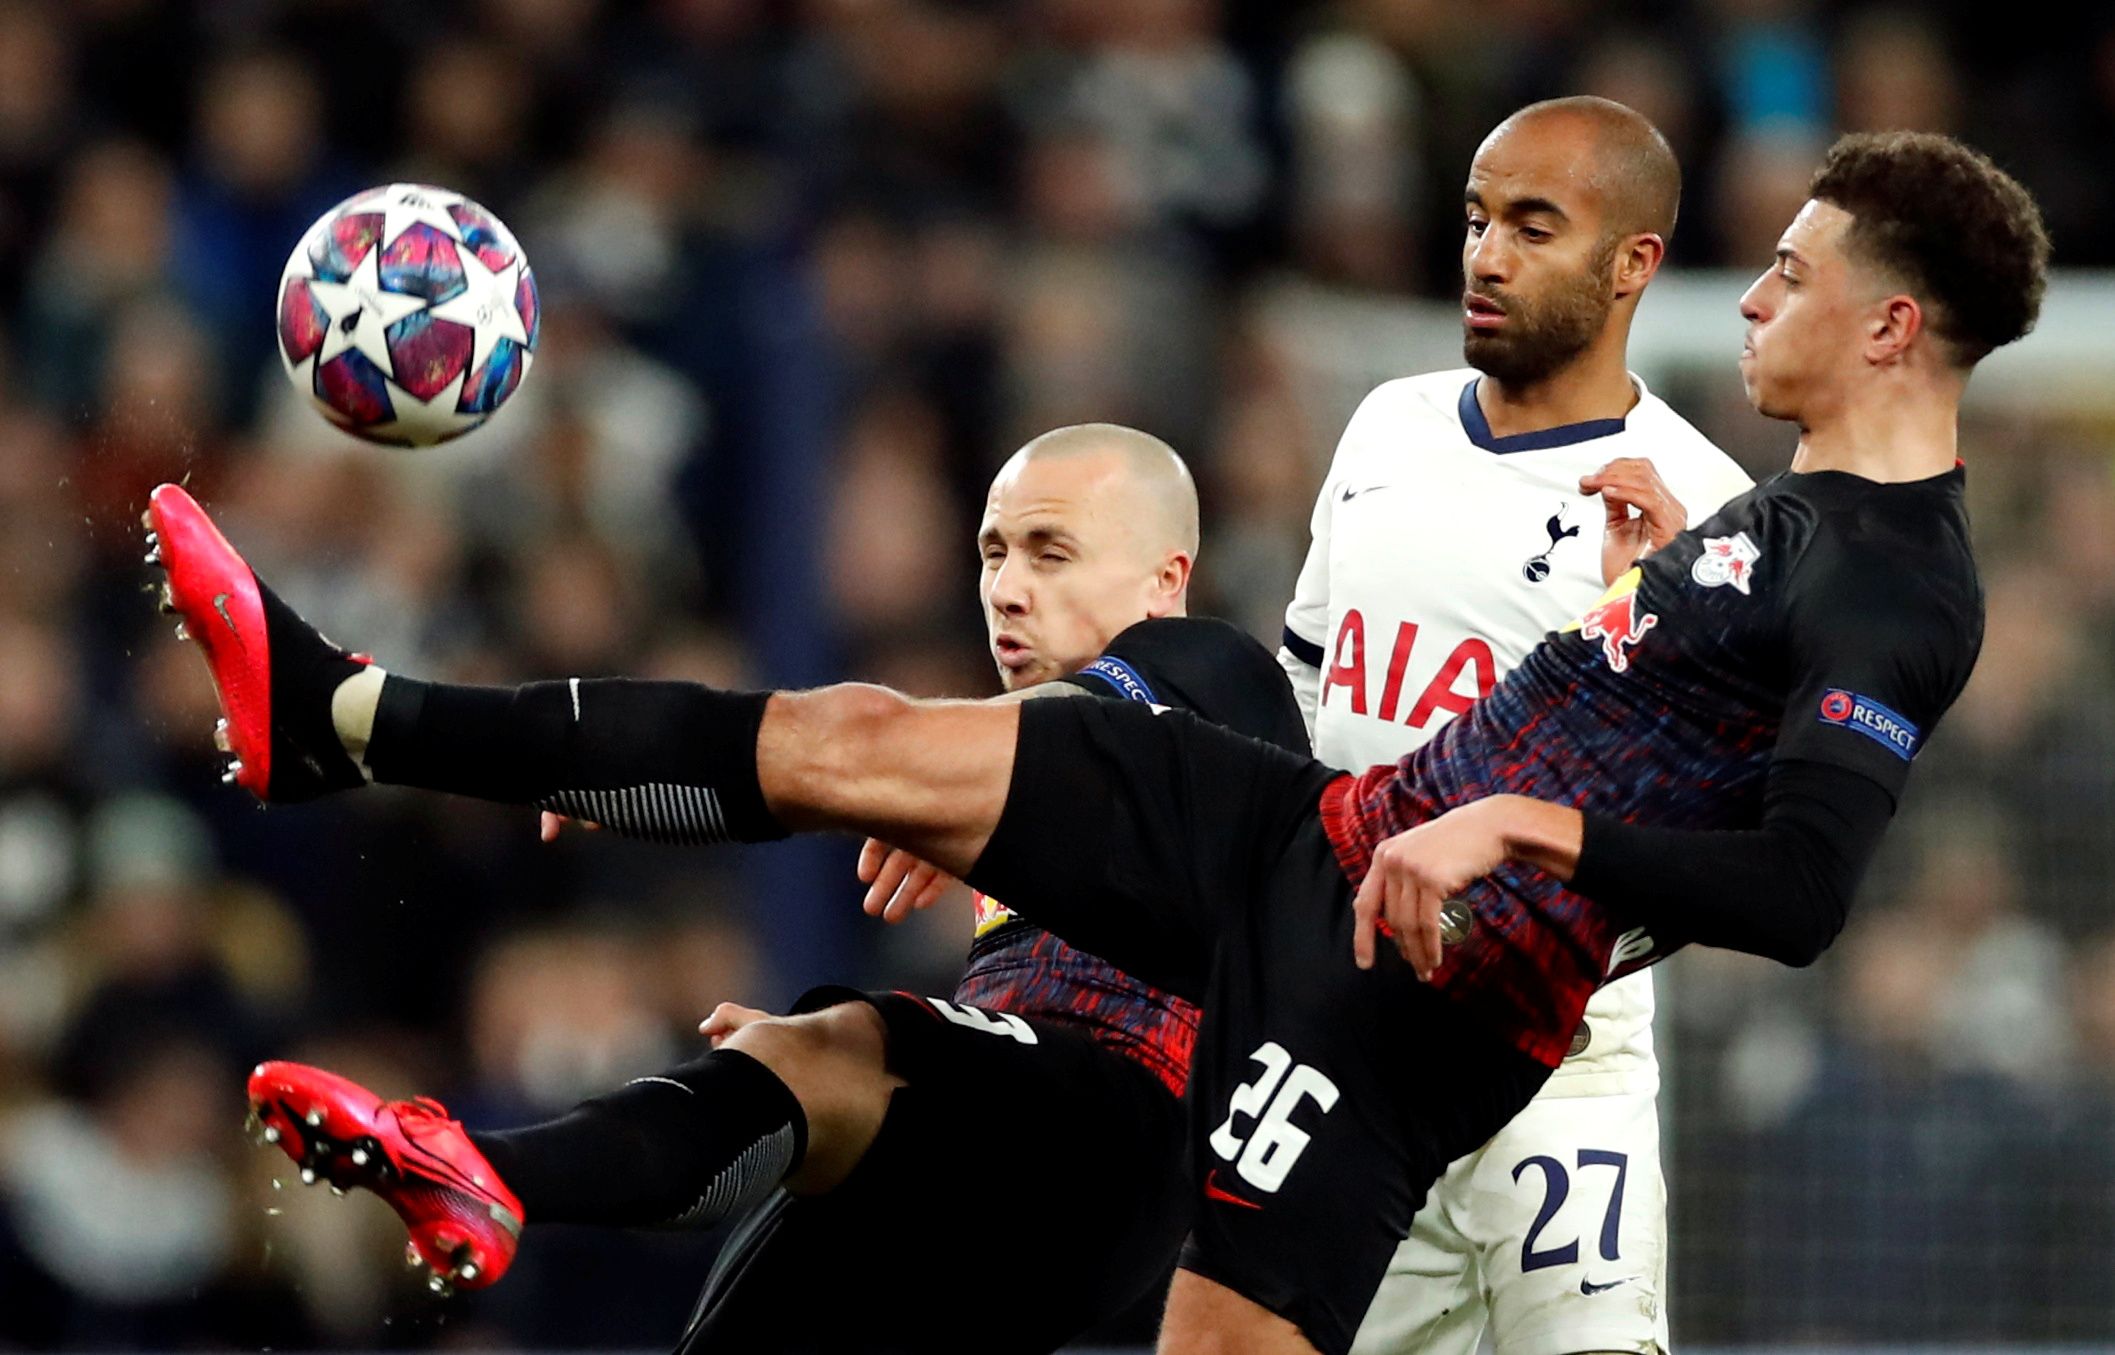 Soccer Football - Champions League - Round of 16 First Leg - Tottenham Hotspur v RB Leipzig - Tottenham Hotspur Stadium, London, Britain - February 19, 2020  RB Leipzig's Angelino and Ethan Ampadu in action with Tottenham Hotspur's Lucas Moura   Action Images via Reuters/Andrew Boyers